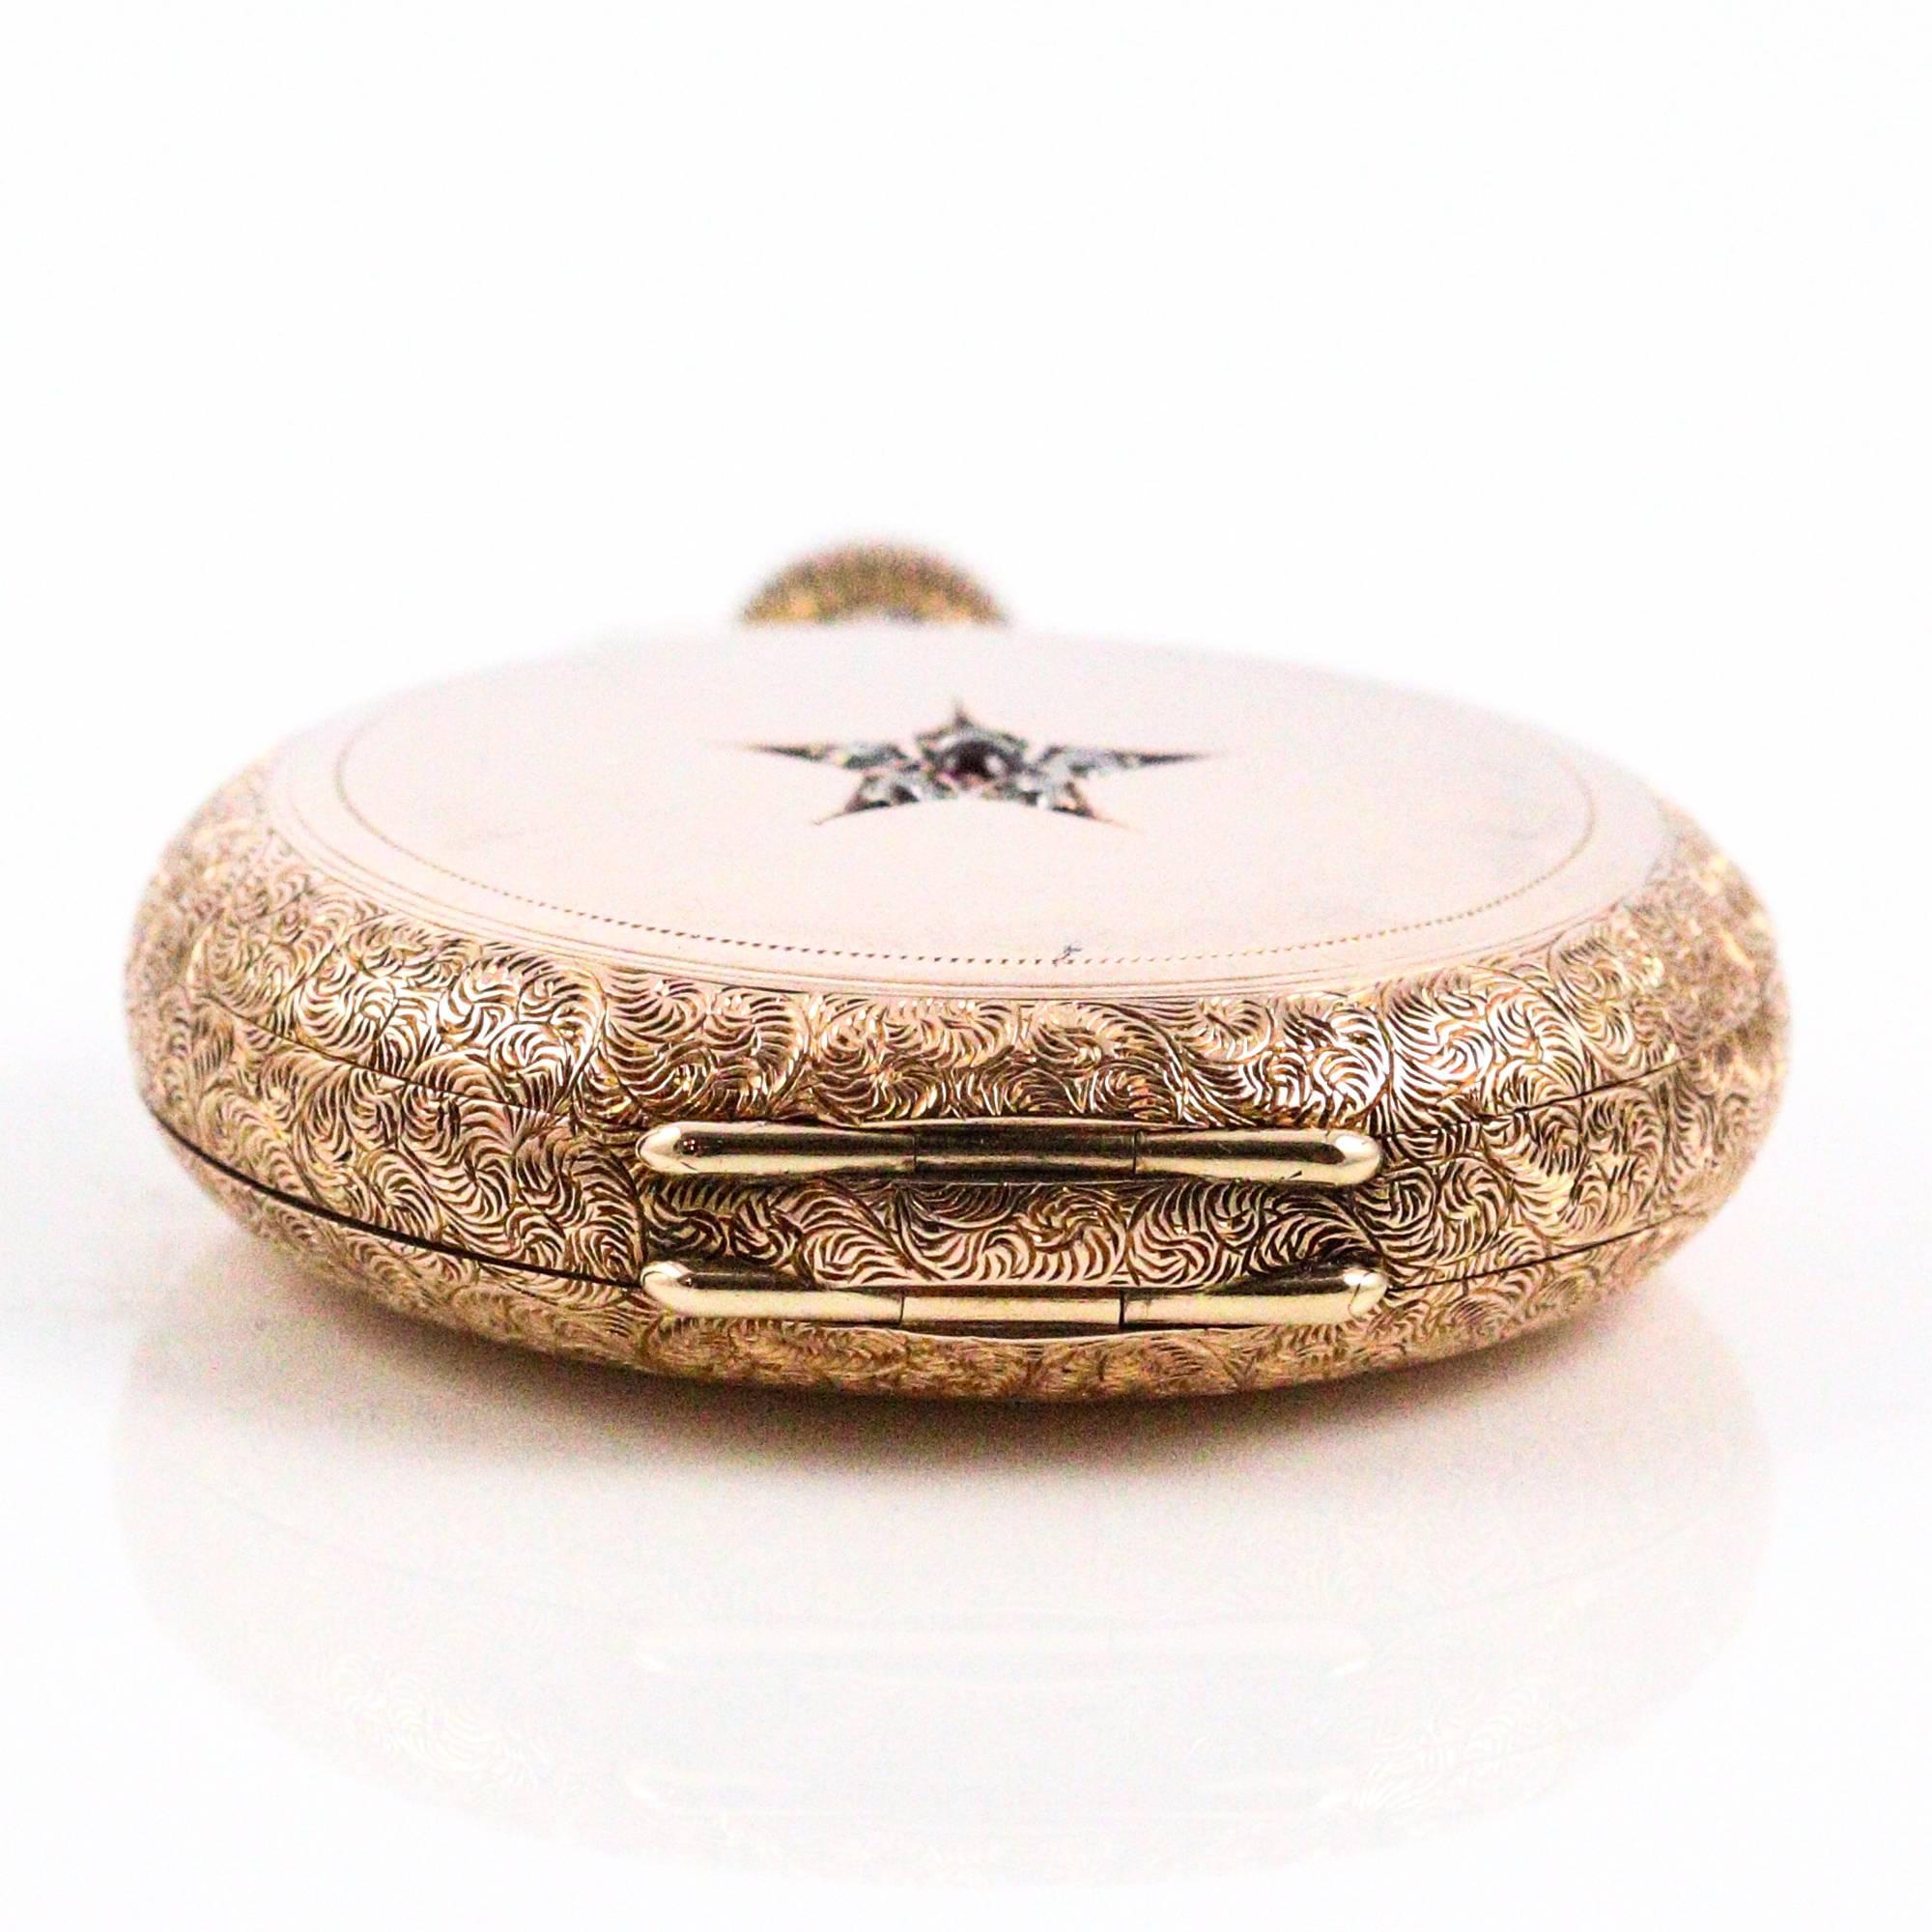 This 14k rose gold Elgin pocket watch features an elegantly engraved hunter's case and a back case decorated with 5 small mine cut diamonds (0.25ctw apx) and 1 small cabochon ruby. The inside back case is engraved with the name "Flora